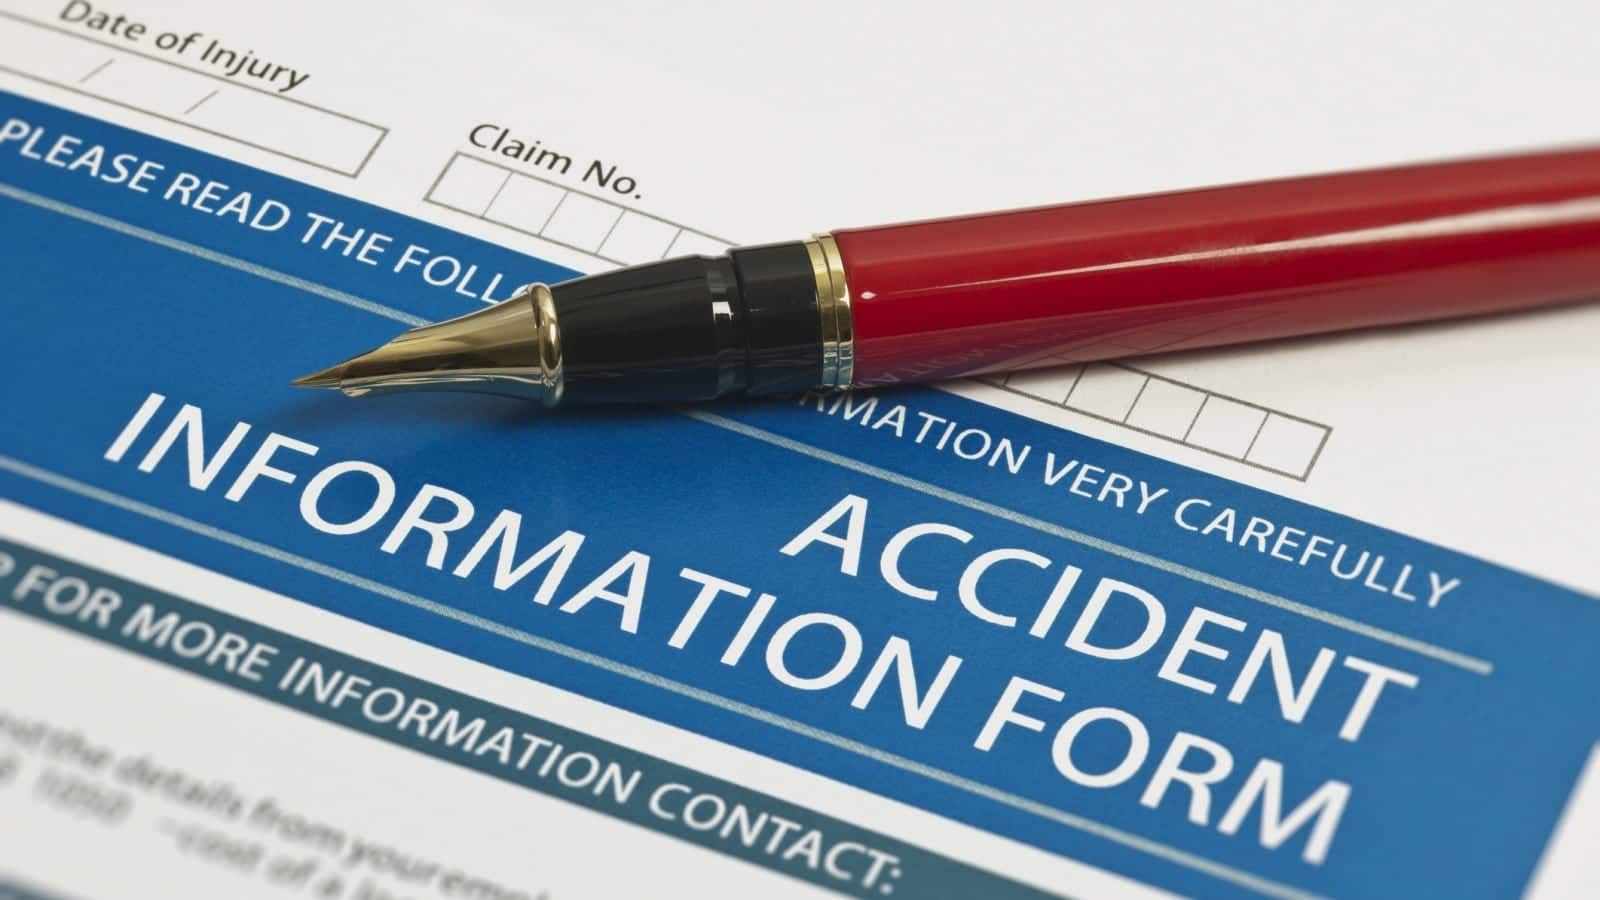 Accident Information Form Stock Photo